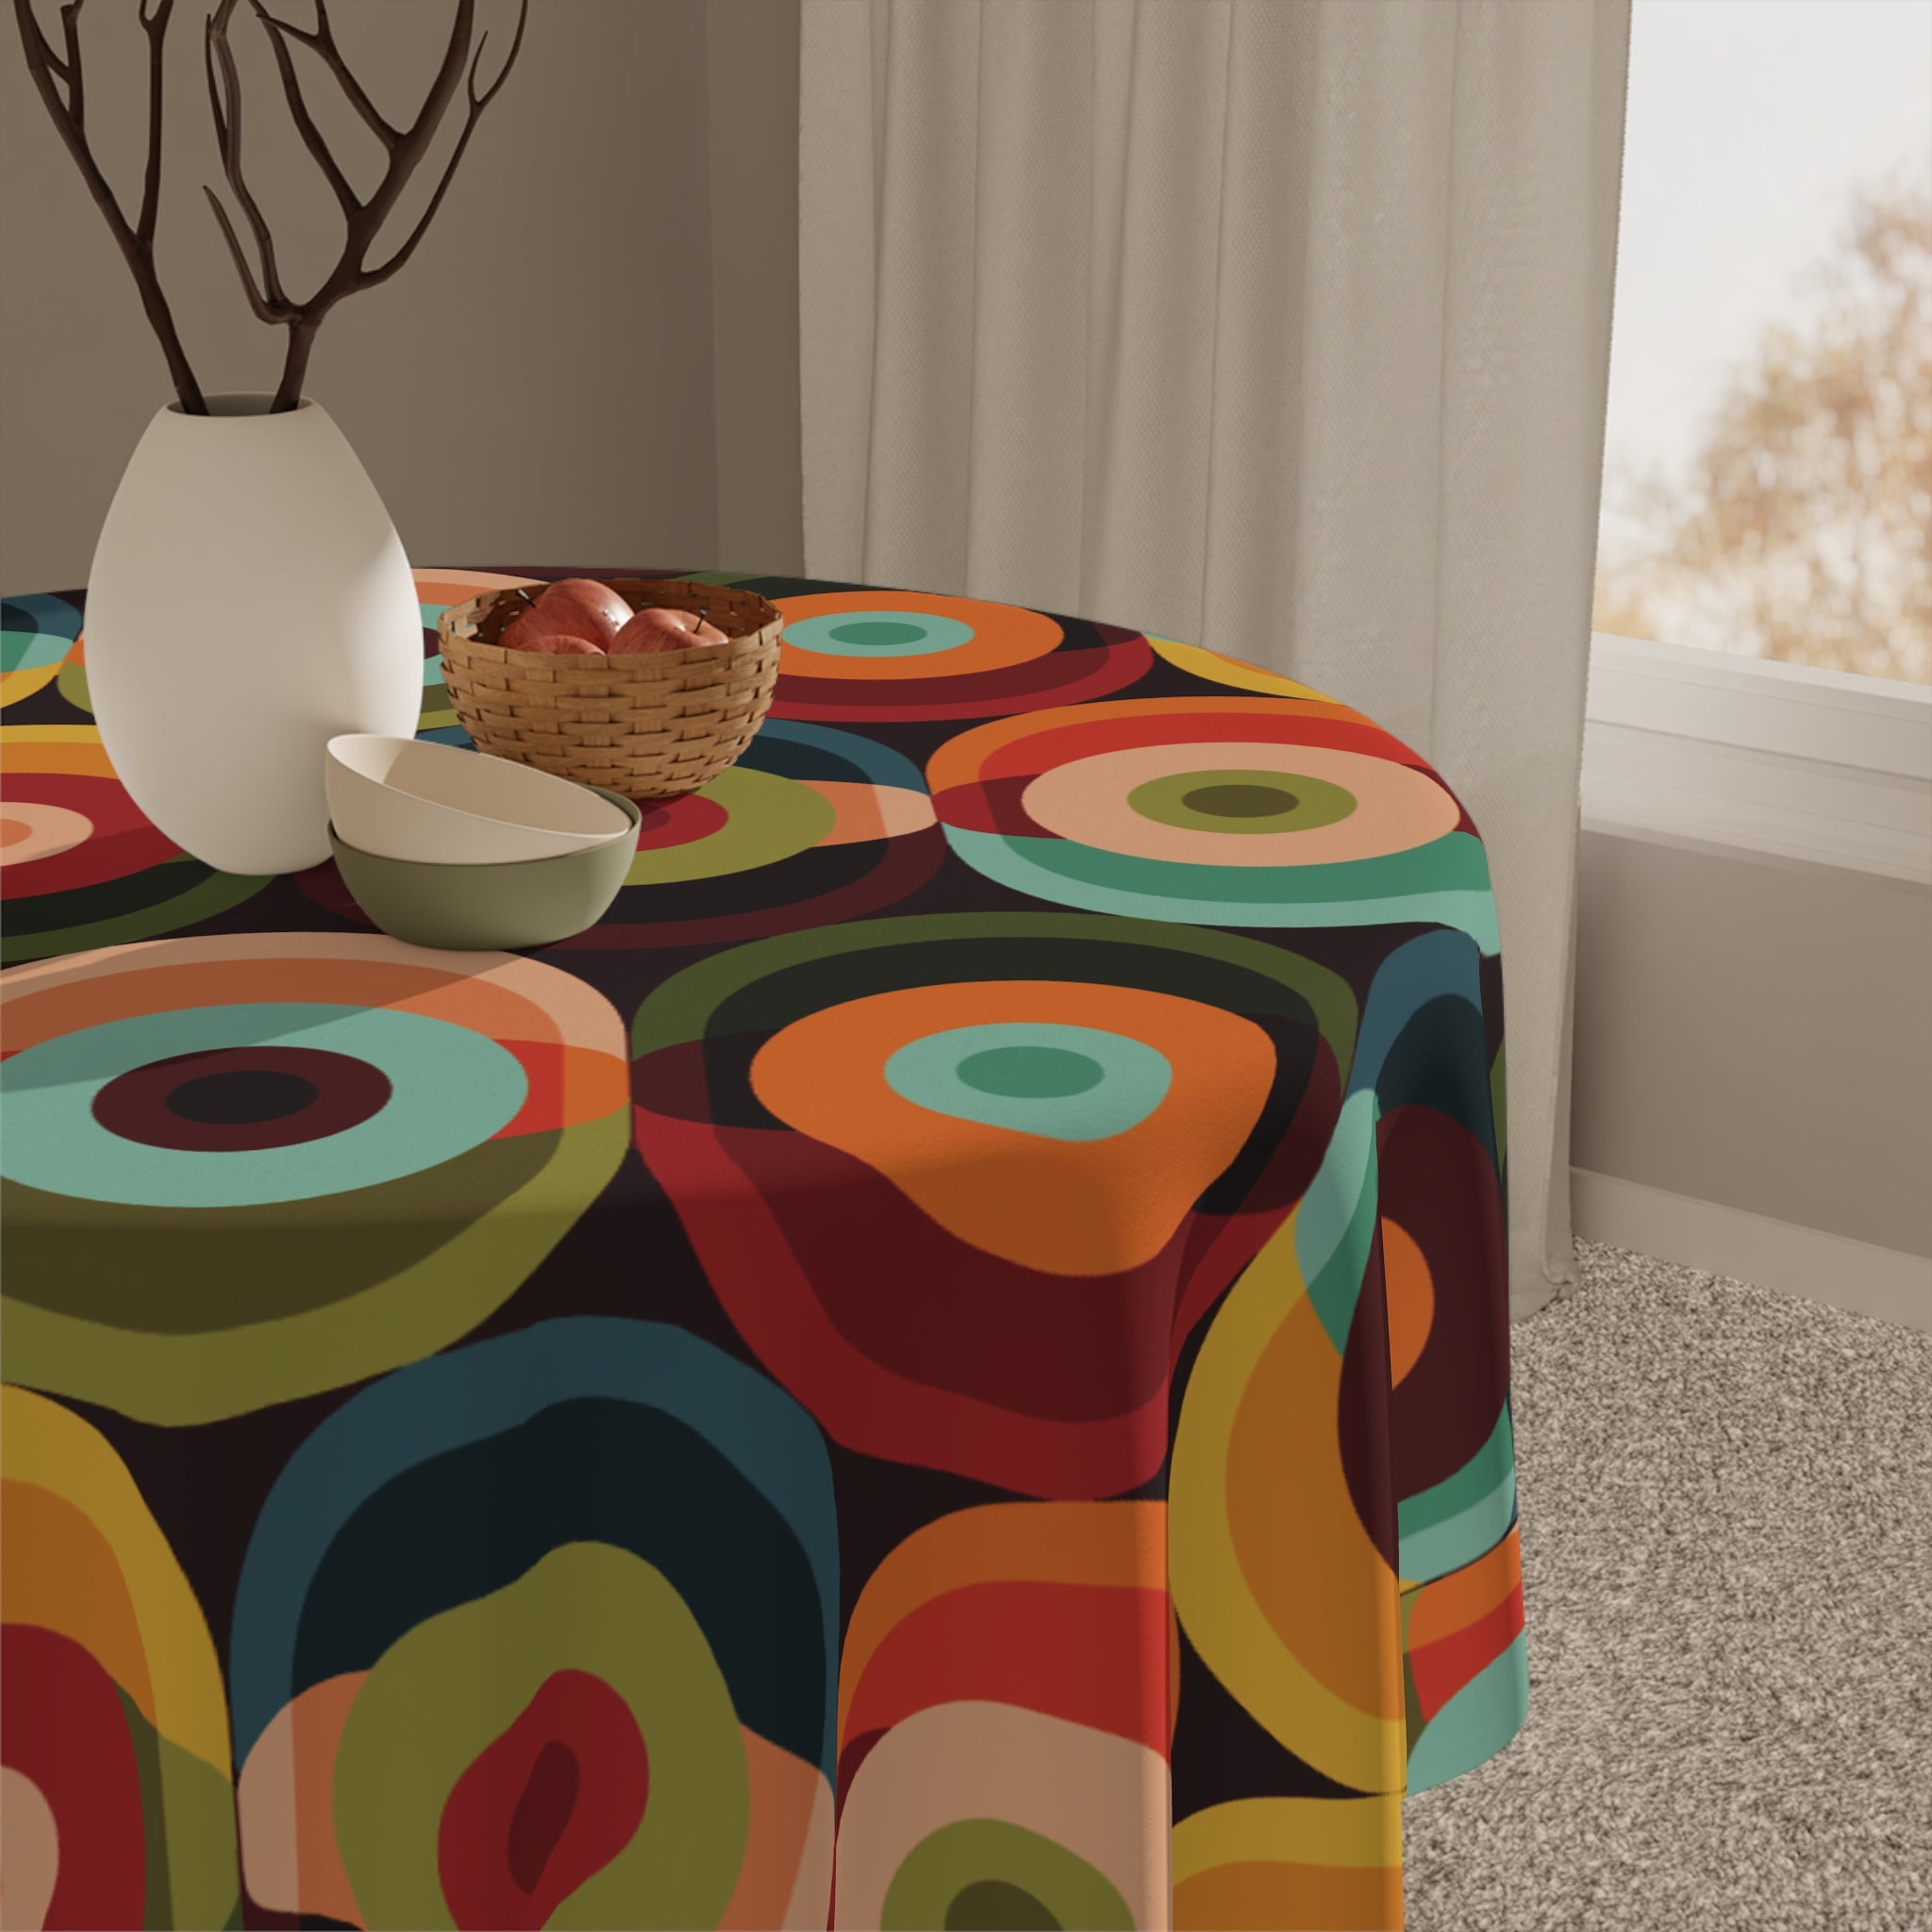 Kate McEnroe New York Retro Groovy Geometric Circle Orbs Tablecloth, 70s Mid Century Modern Psychedelic Abstract Table LinensTablecloths12921271530129230652